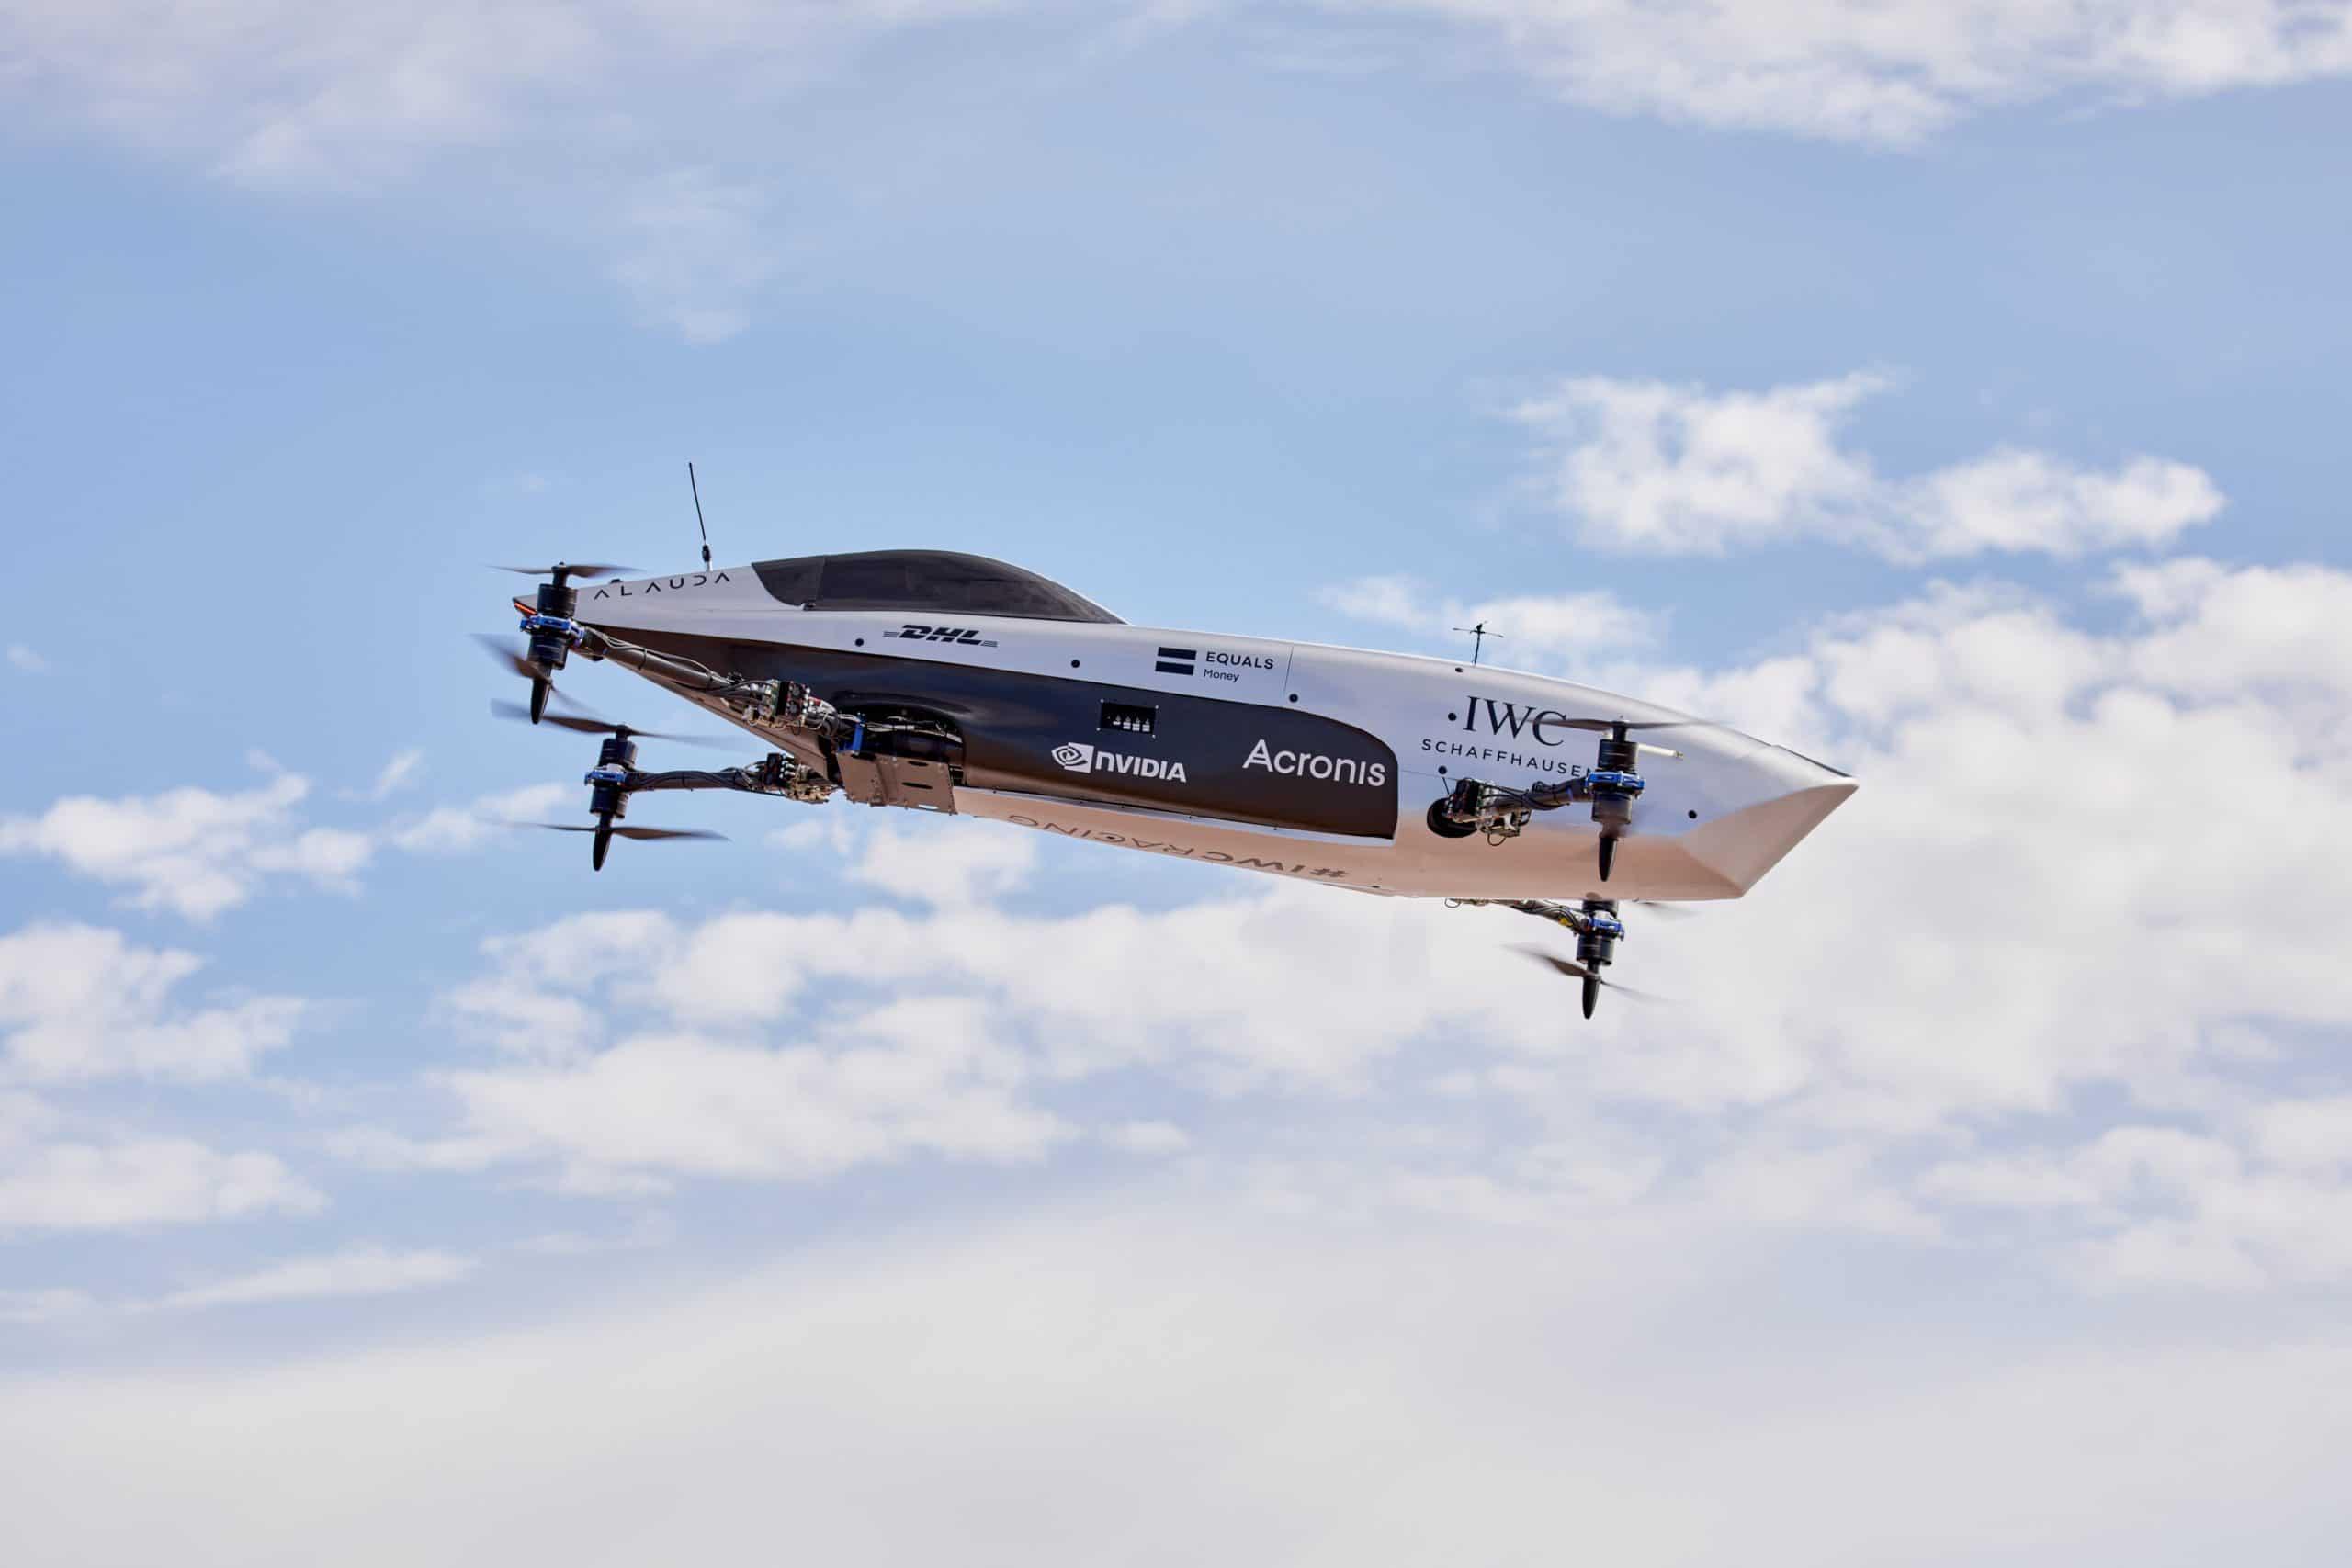 Airspeeder — World’s first flying racing car makes historic flight